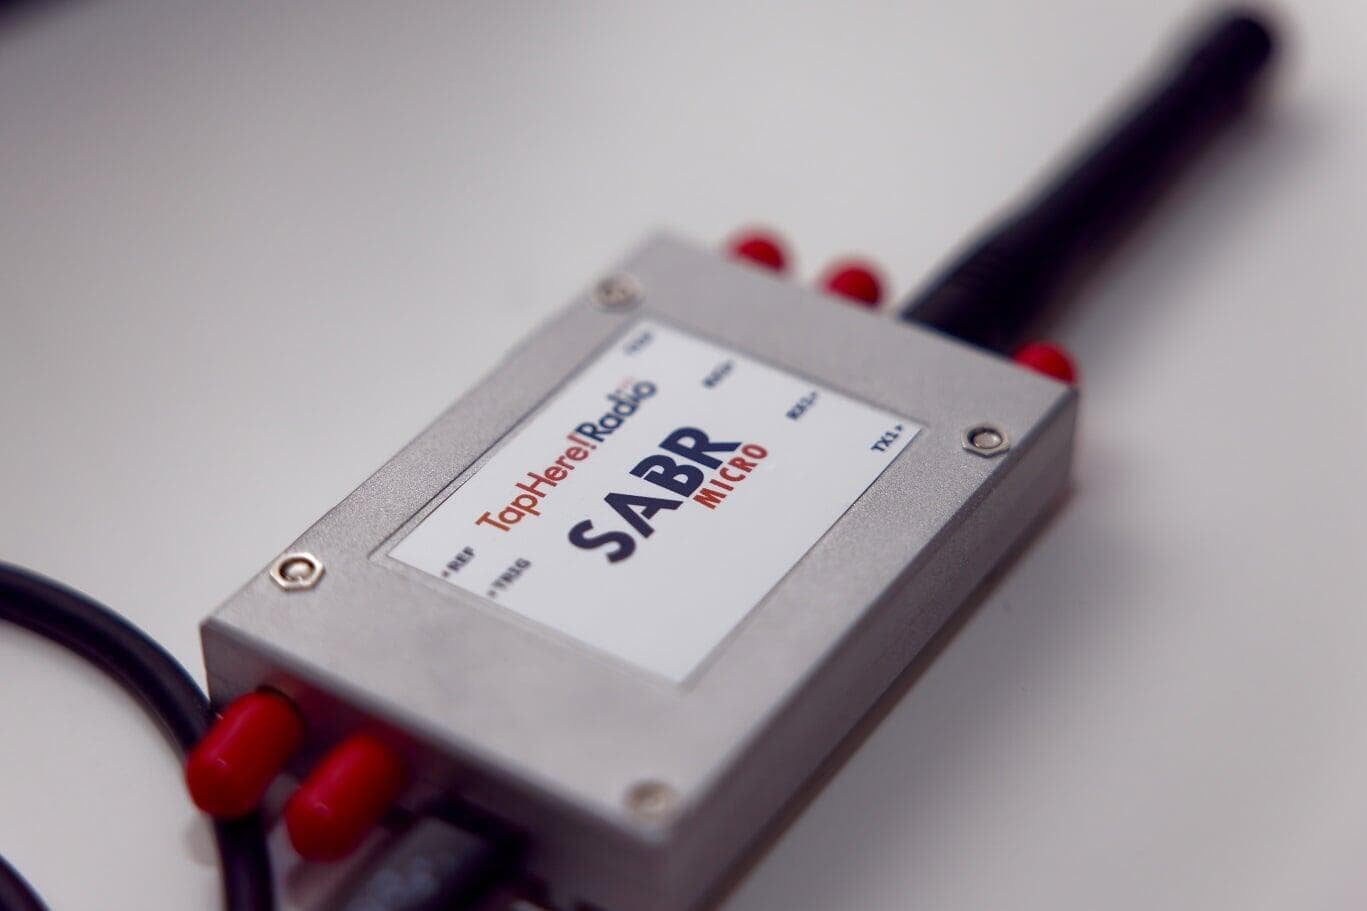 SABR the handheld software defined radio for PinPoint